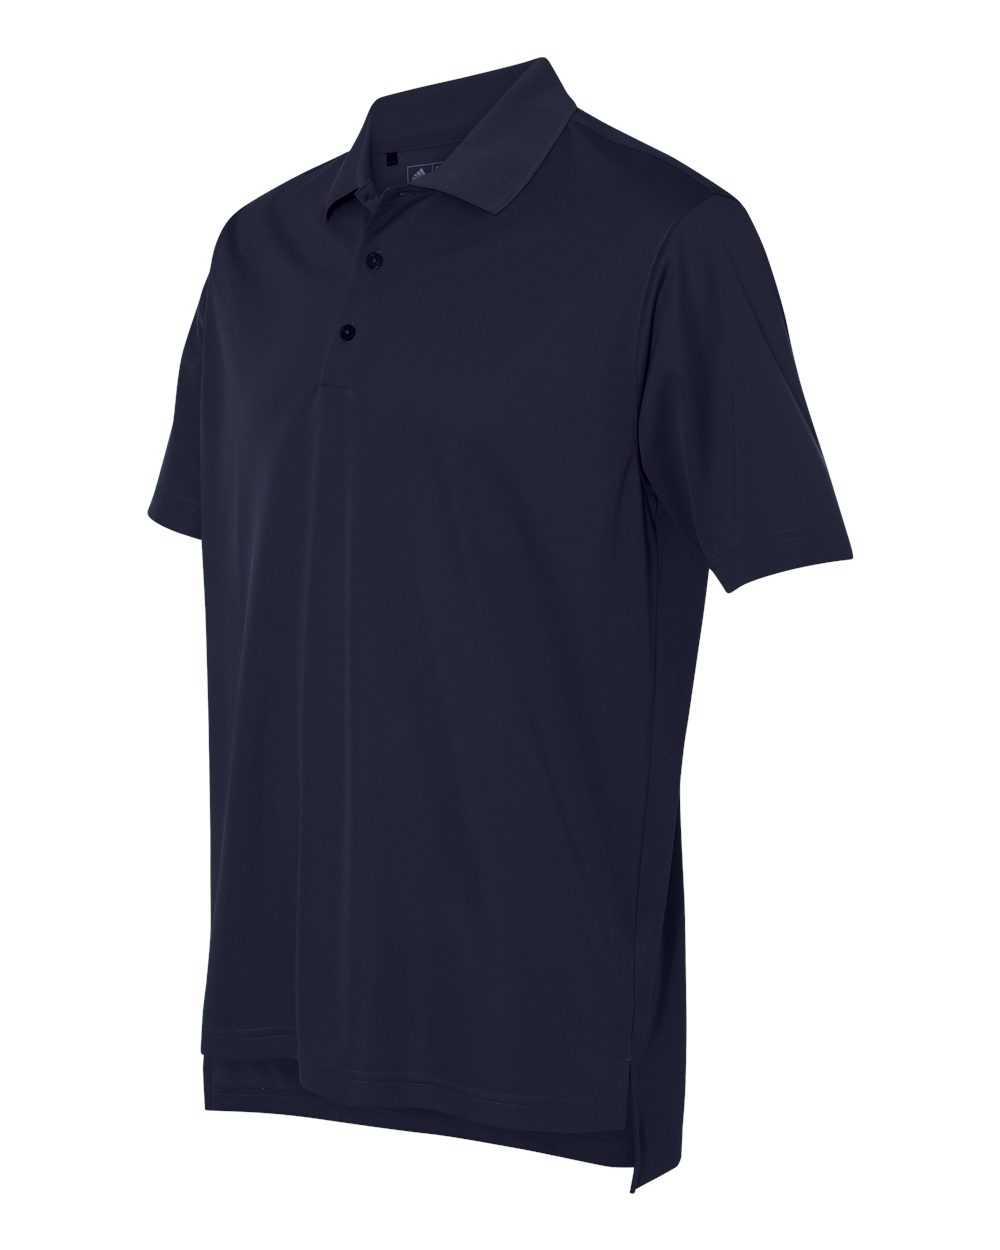 Adidas A130 Basic Sport Shirt - Navy White - HIT a Double